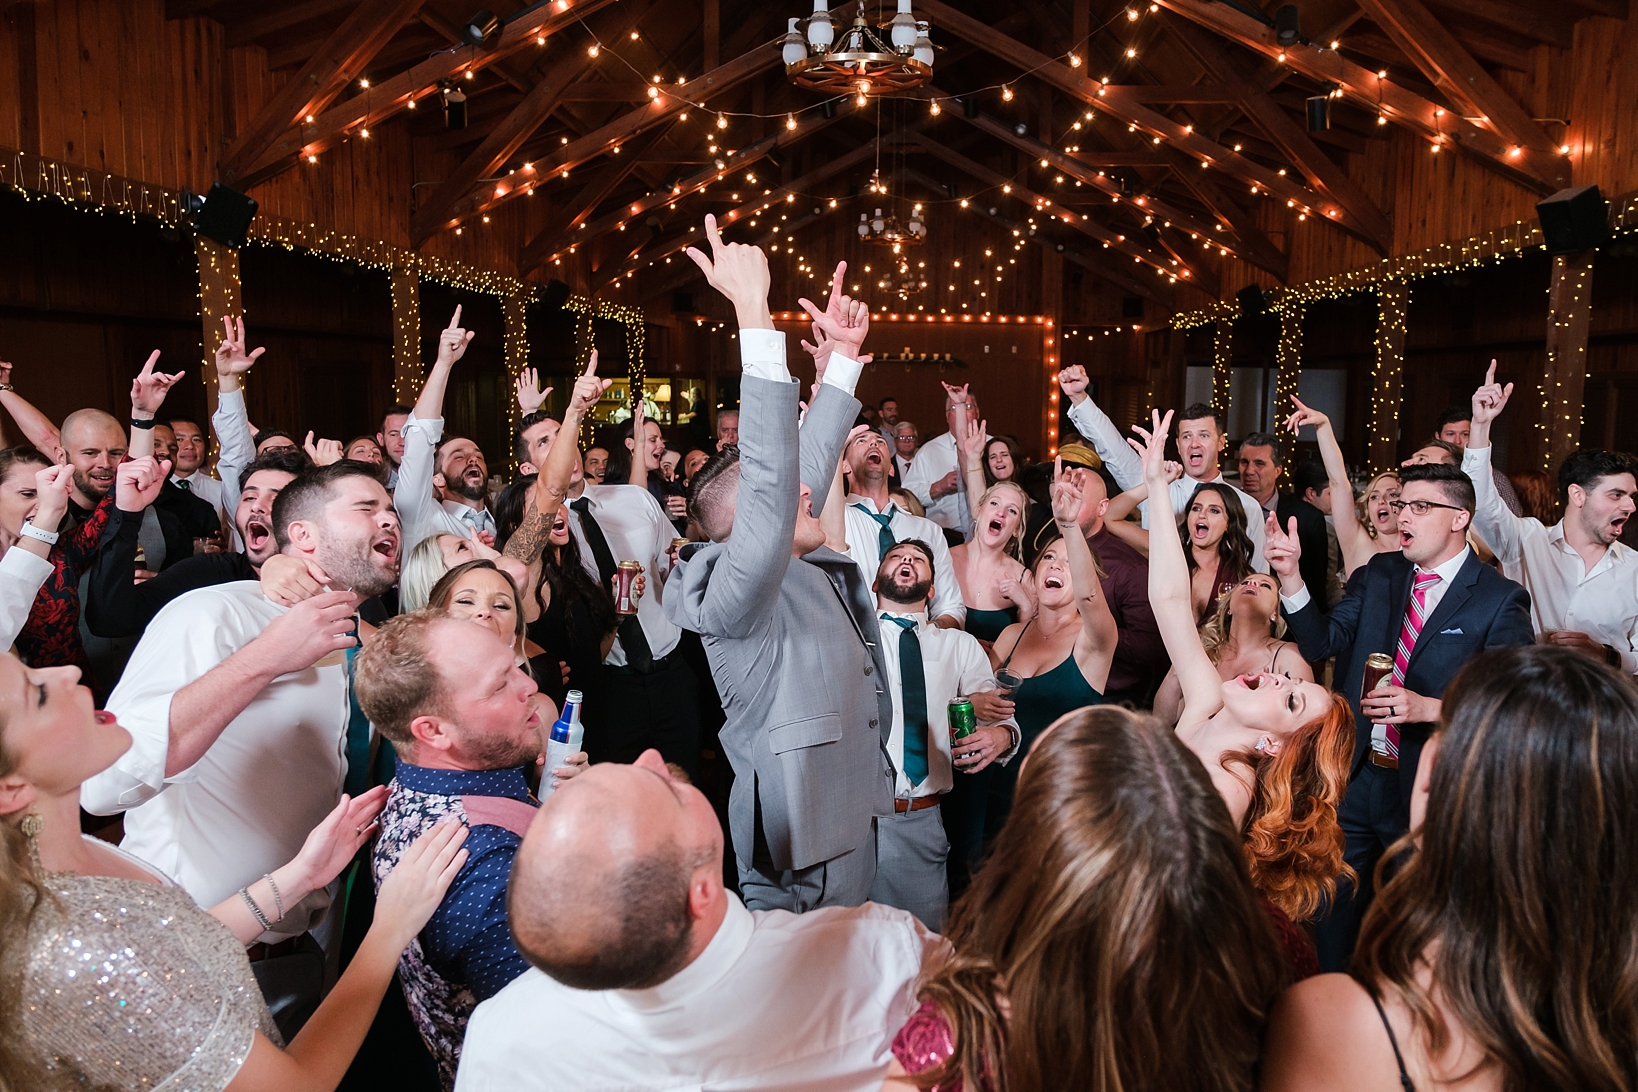 The dance party during the reception of the wedding as people throw their hands up in the air